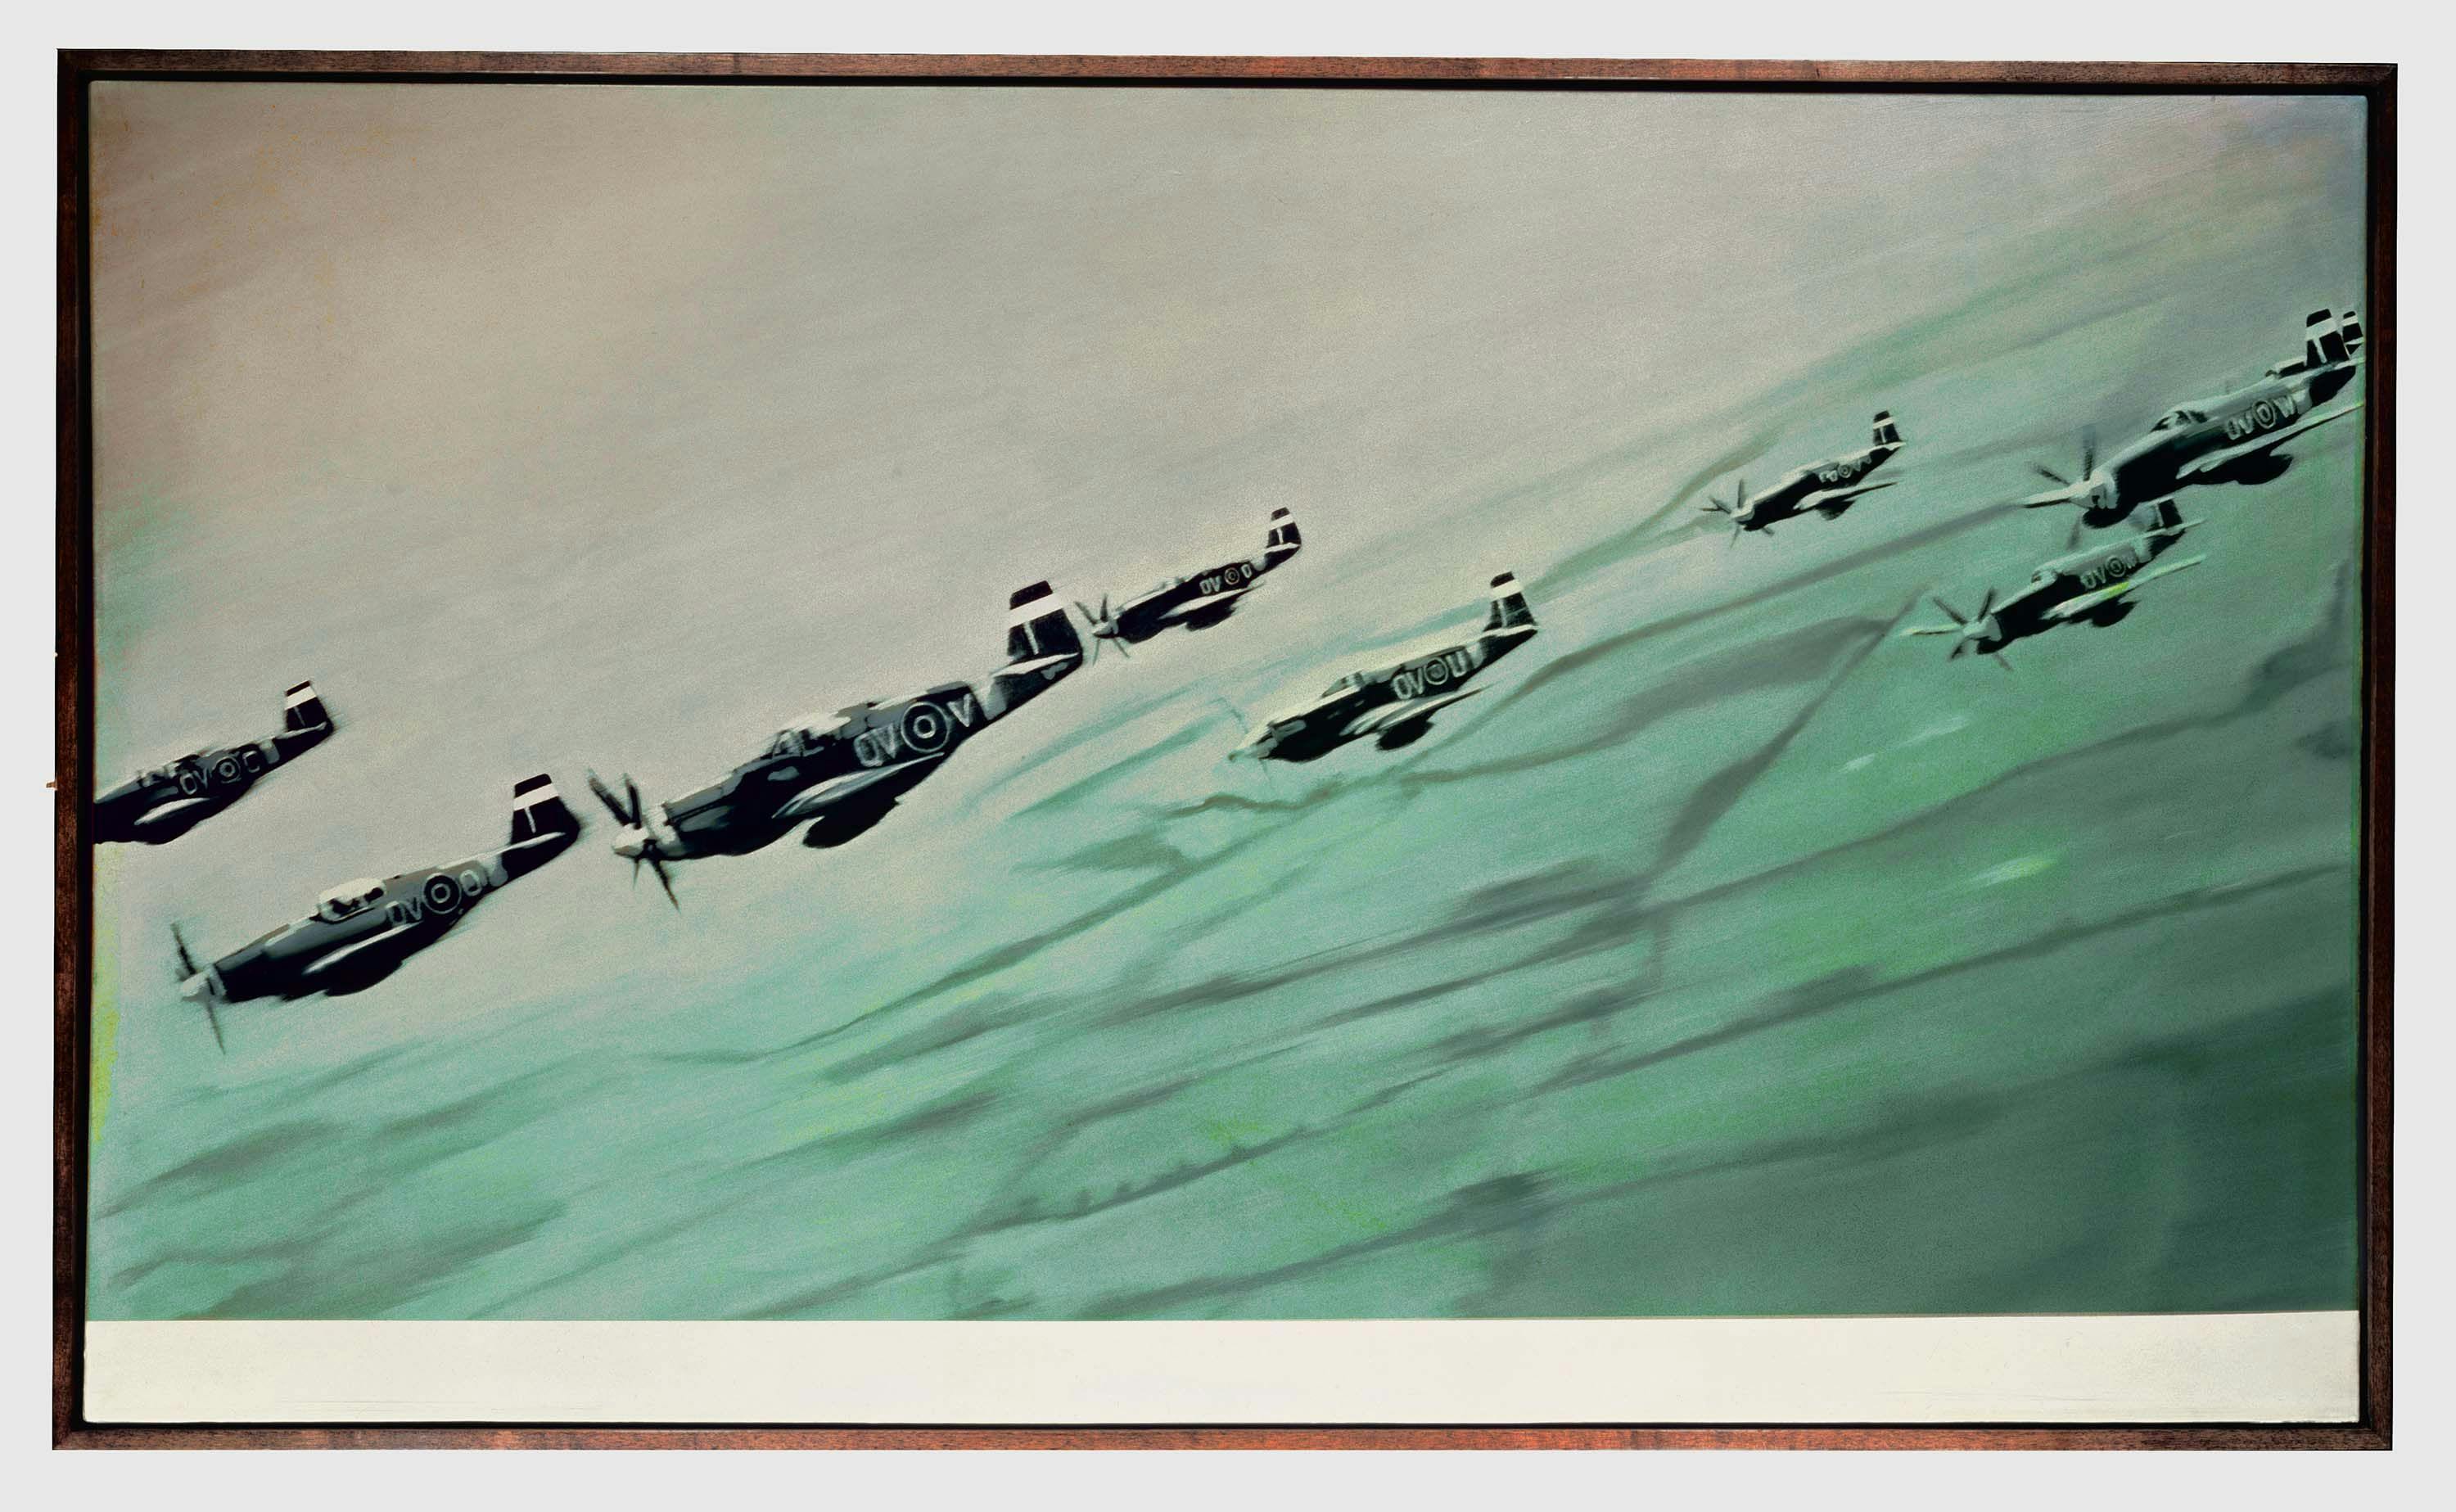 A painting by Gerhard Richter, titled Mustang-Staffel (Mustang Squadron), dated 1964.